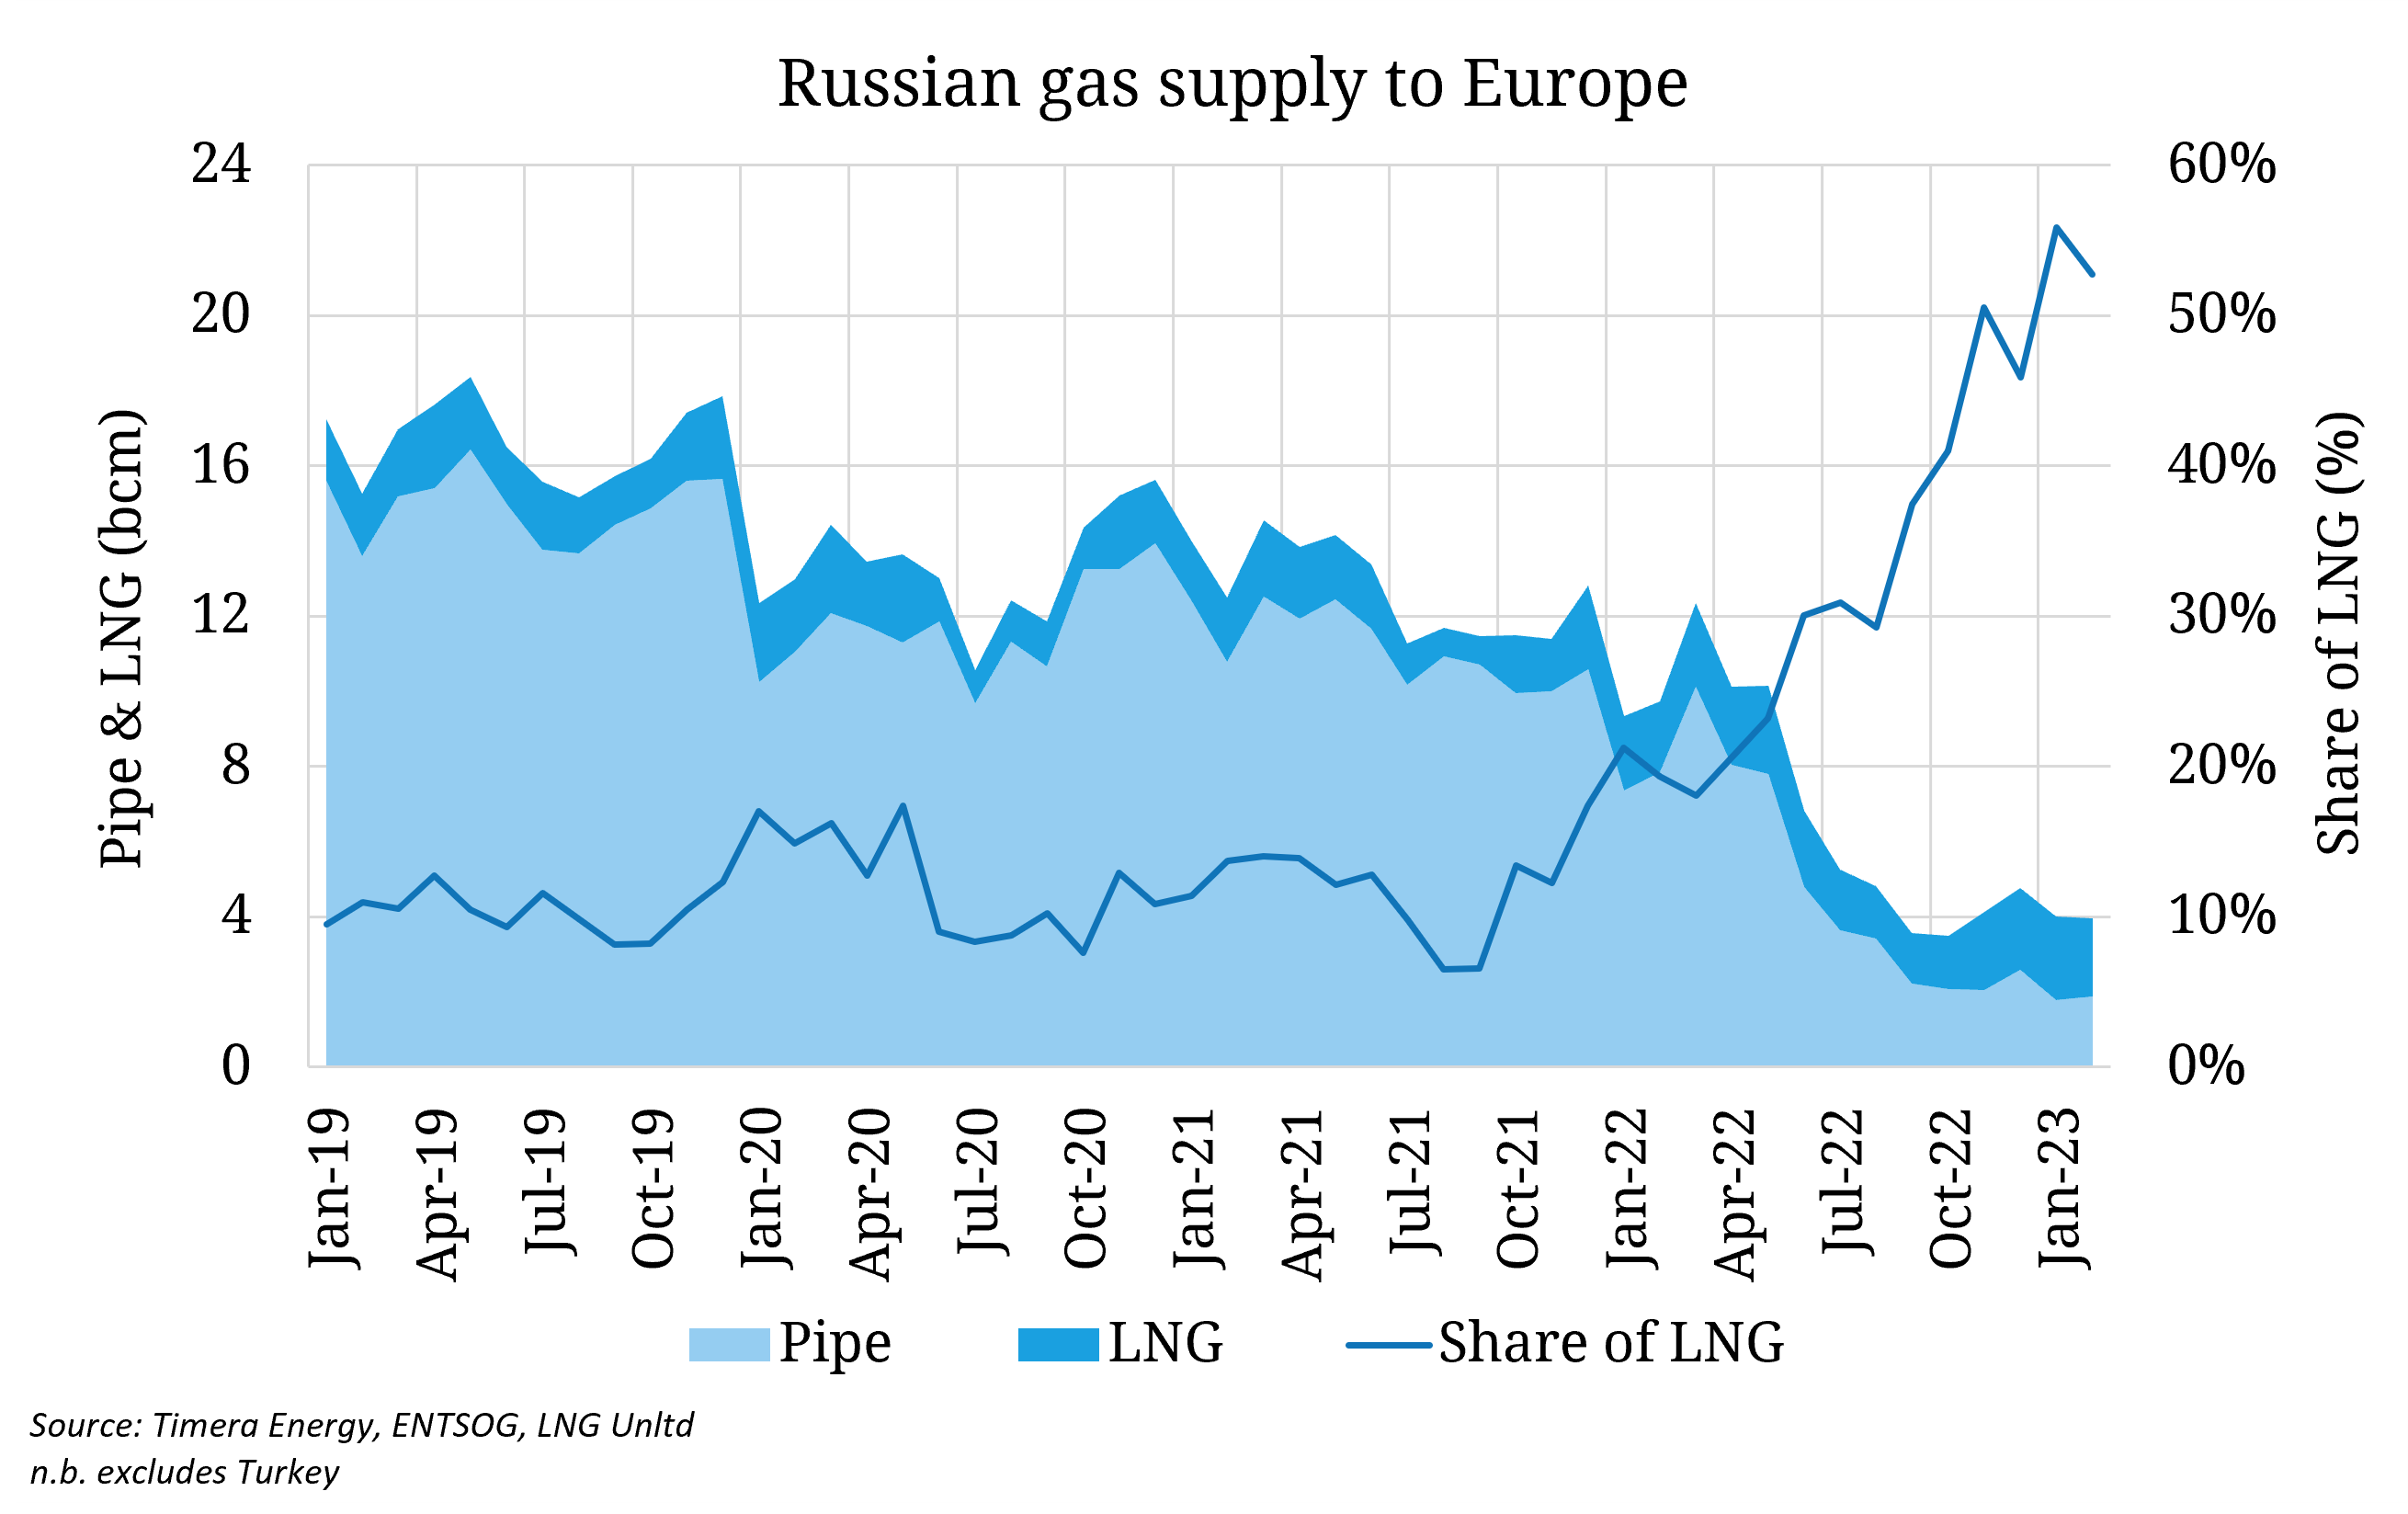 Russian LNG exports to Europe overtake piped deliveries